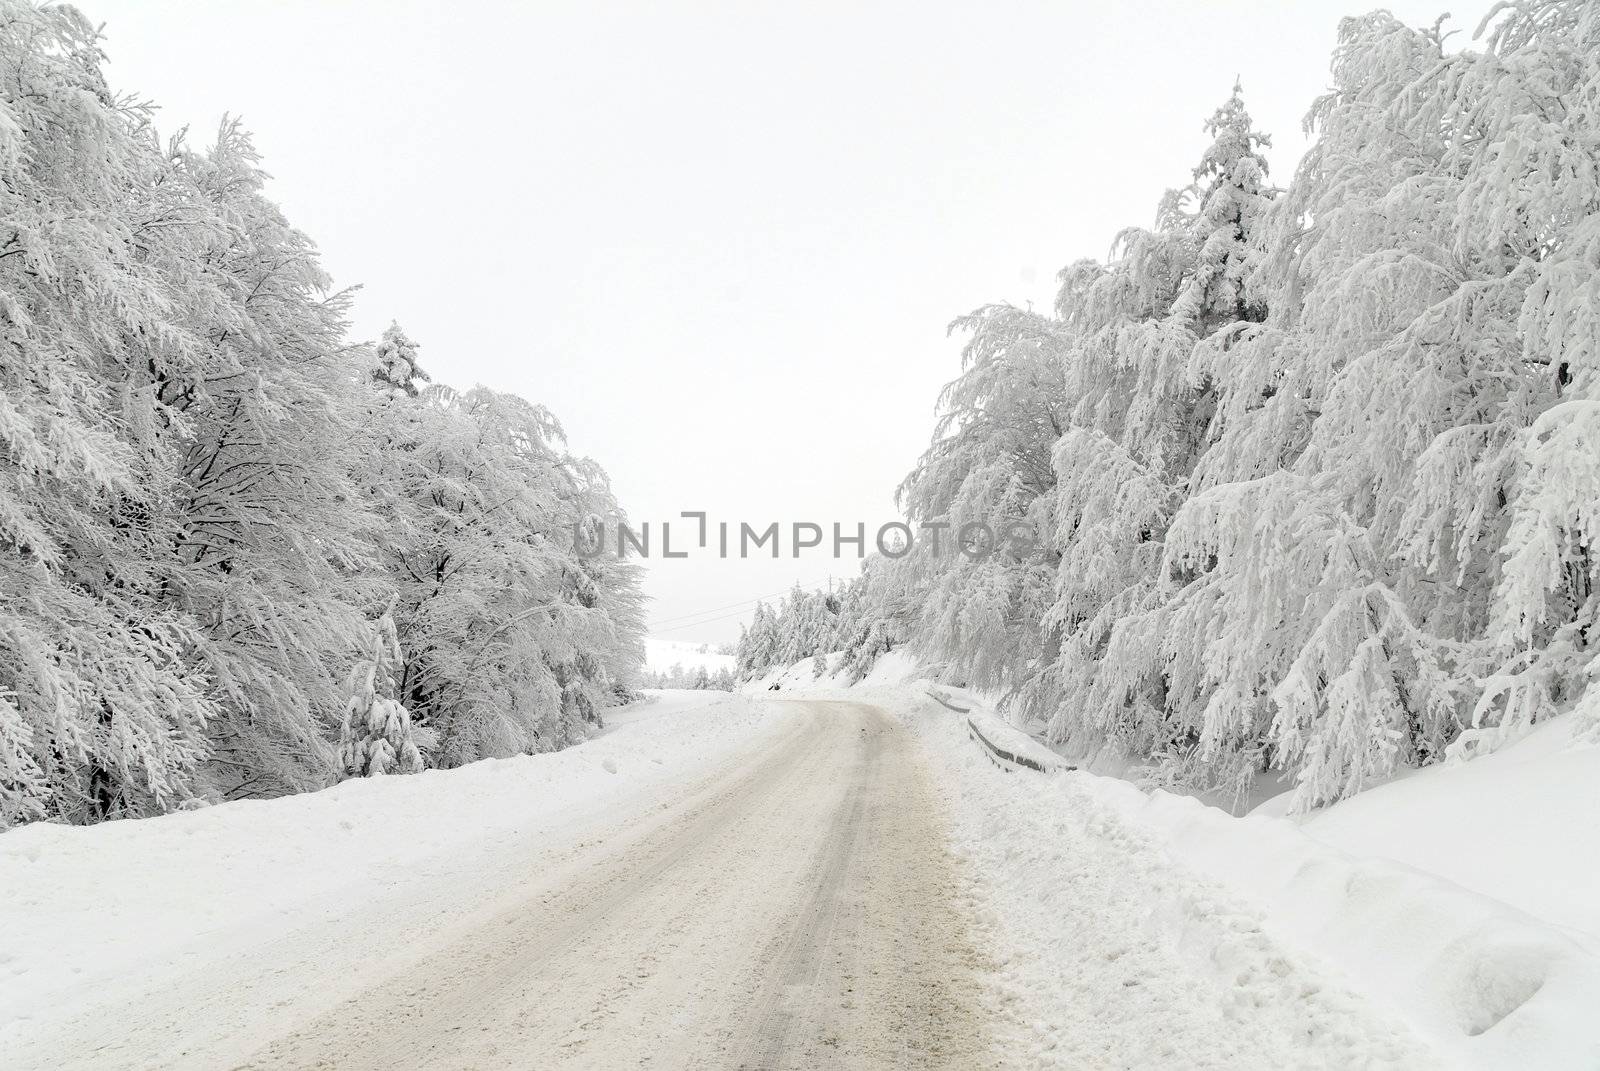 Traffic road in frost and snow, mountain, forest